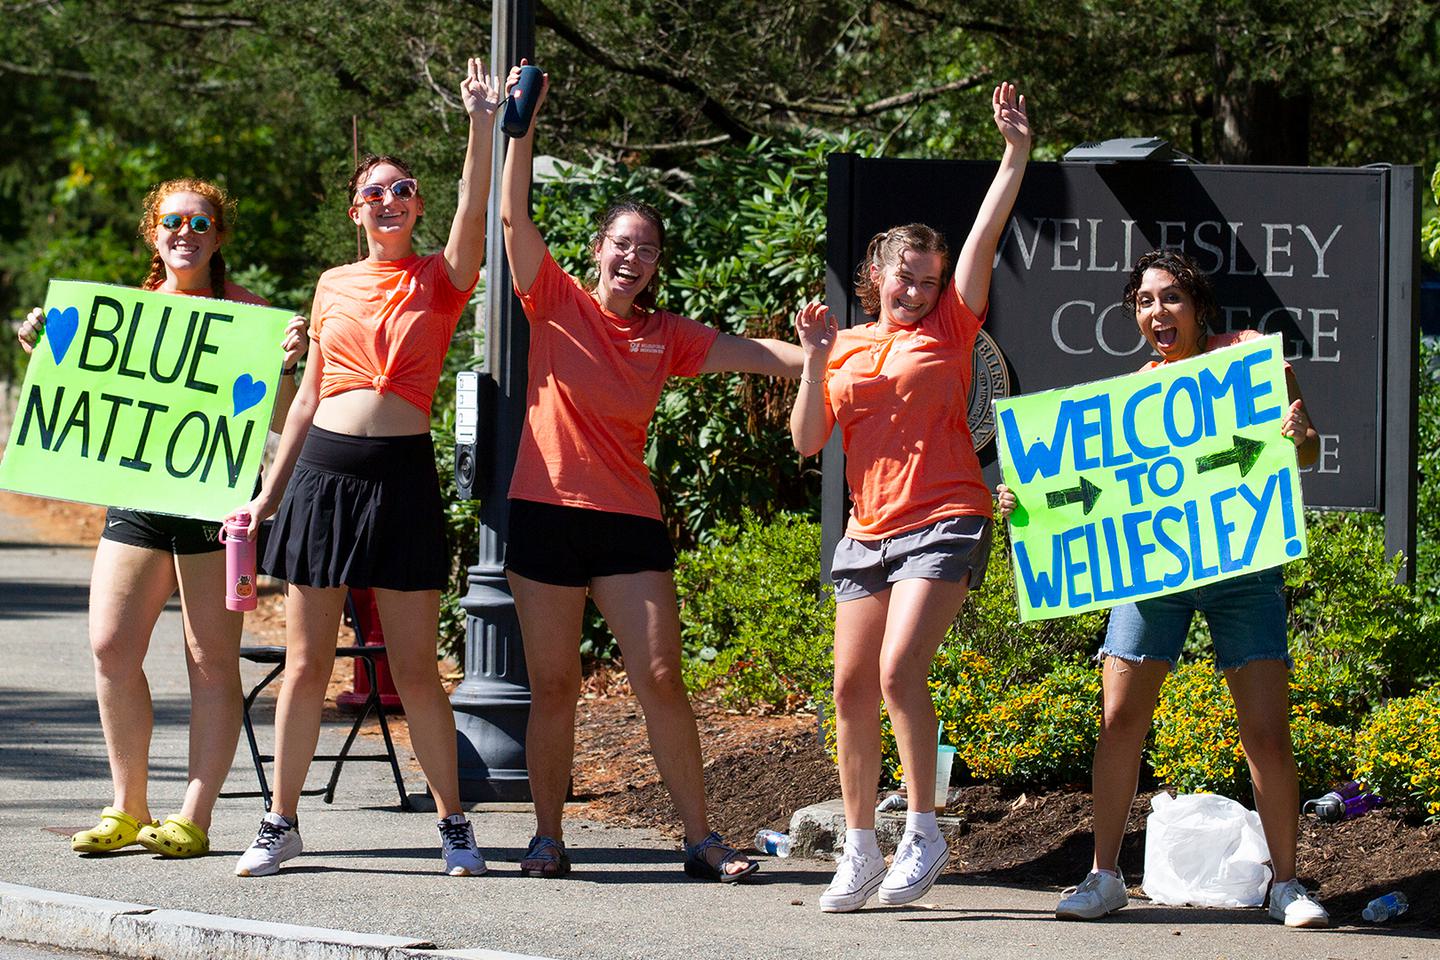 Five students stand at the entrance of Wellesley, waving welcome signs.